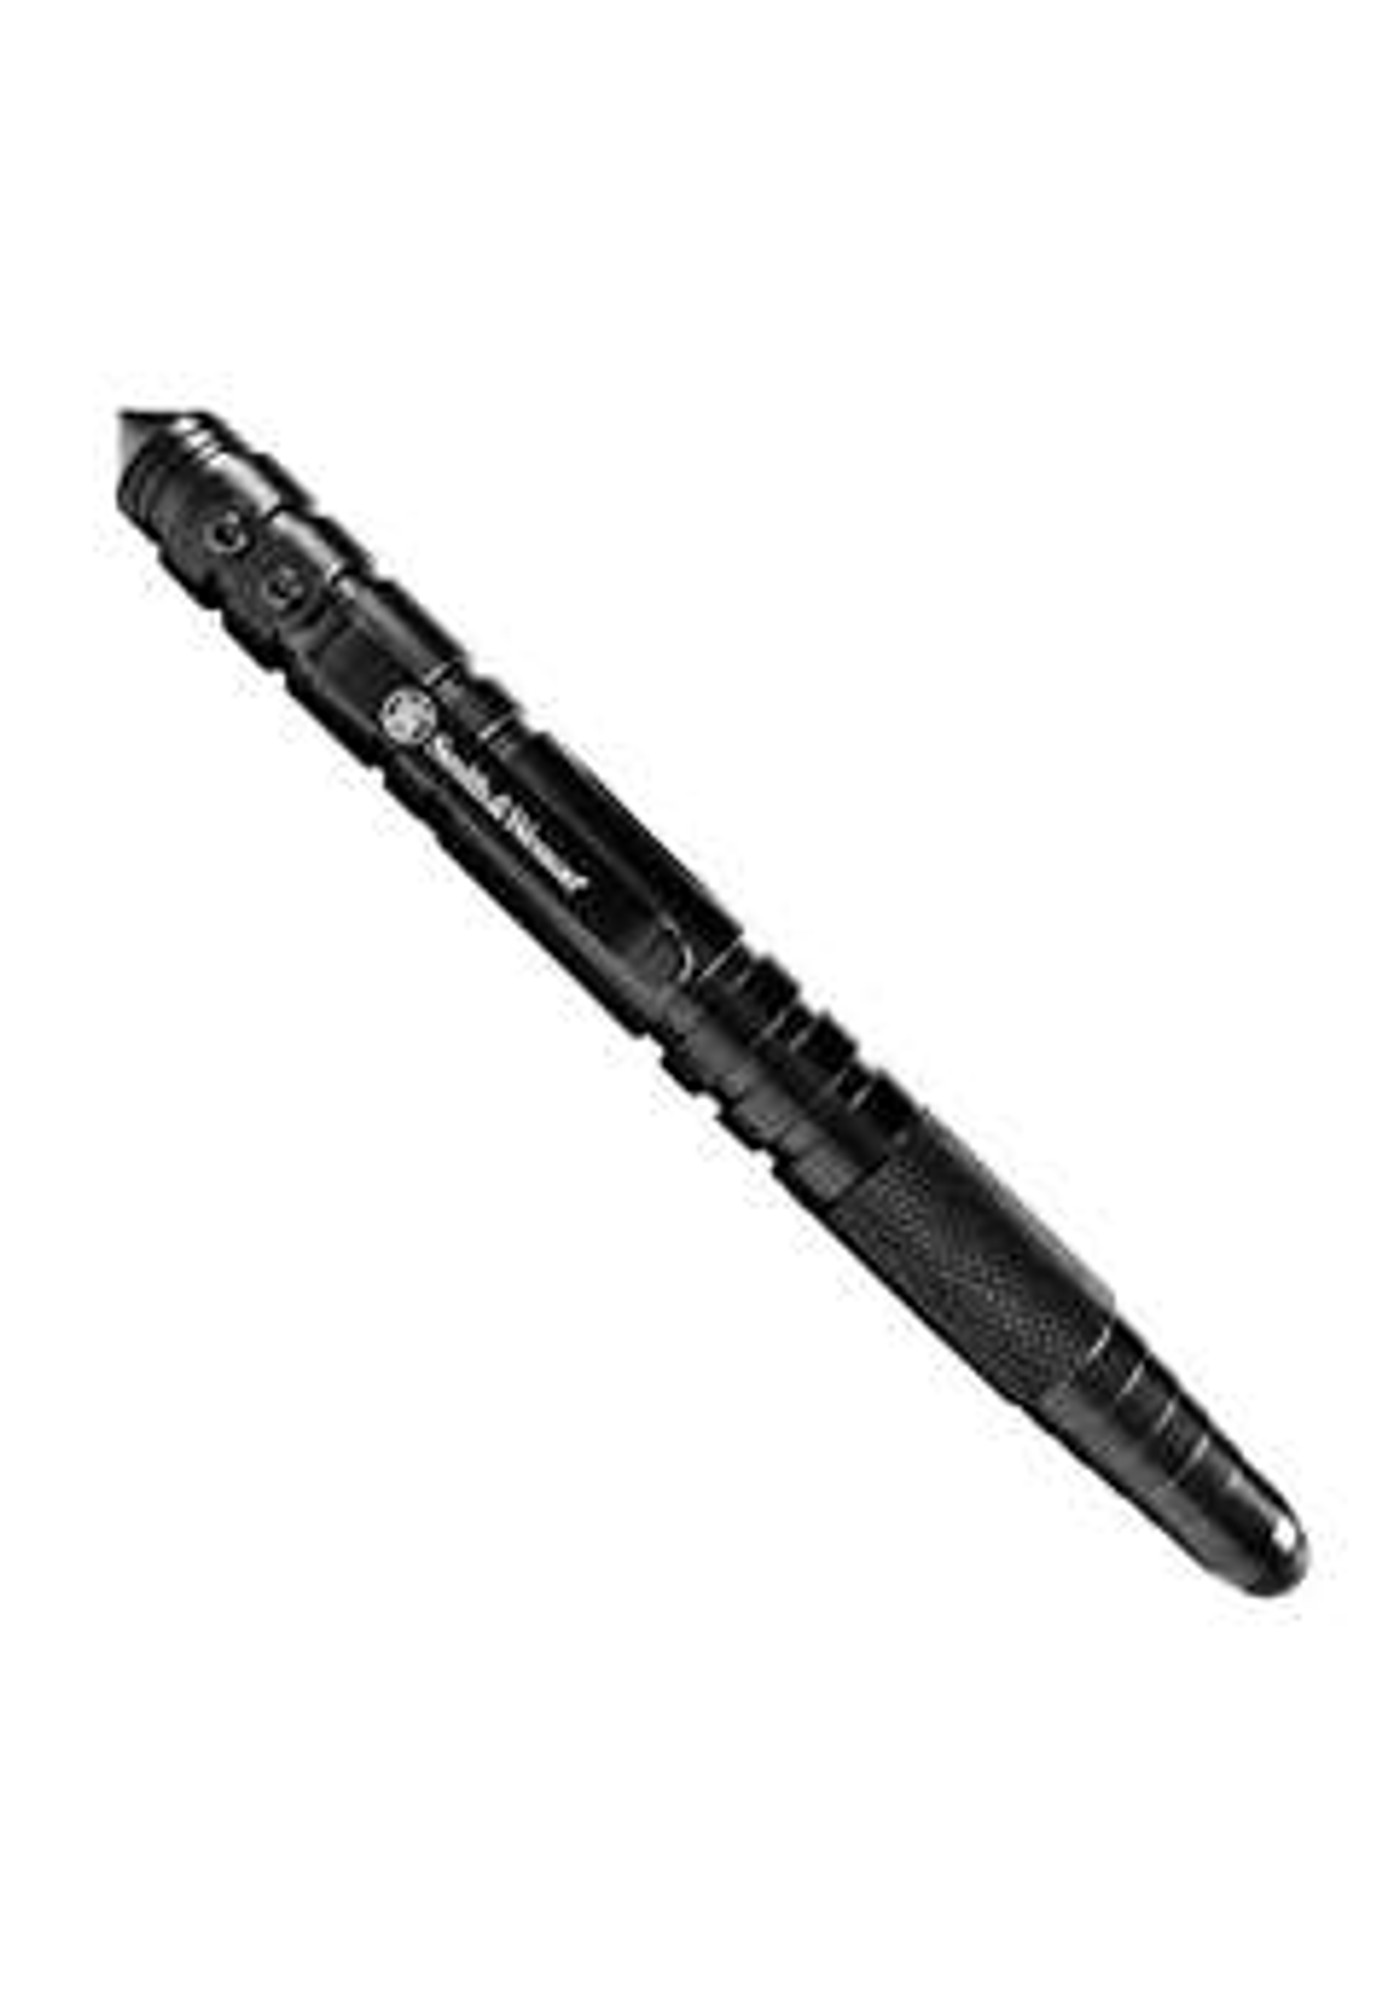 Smith & Wesson Tactical Stylus Pen